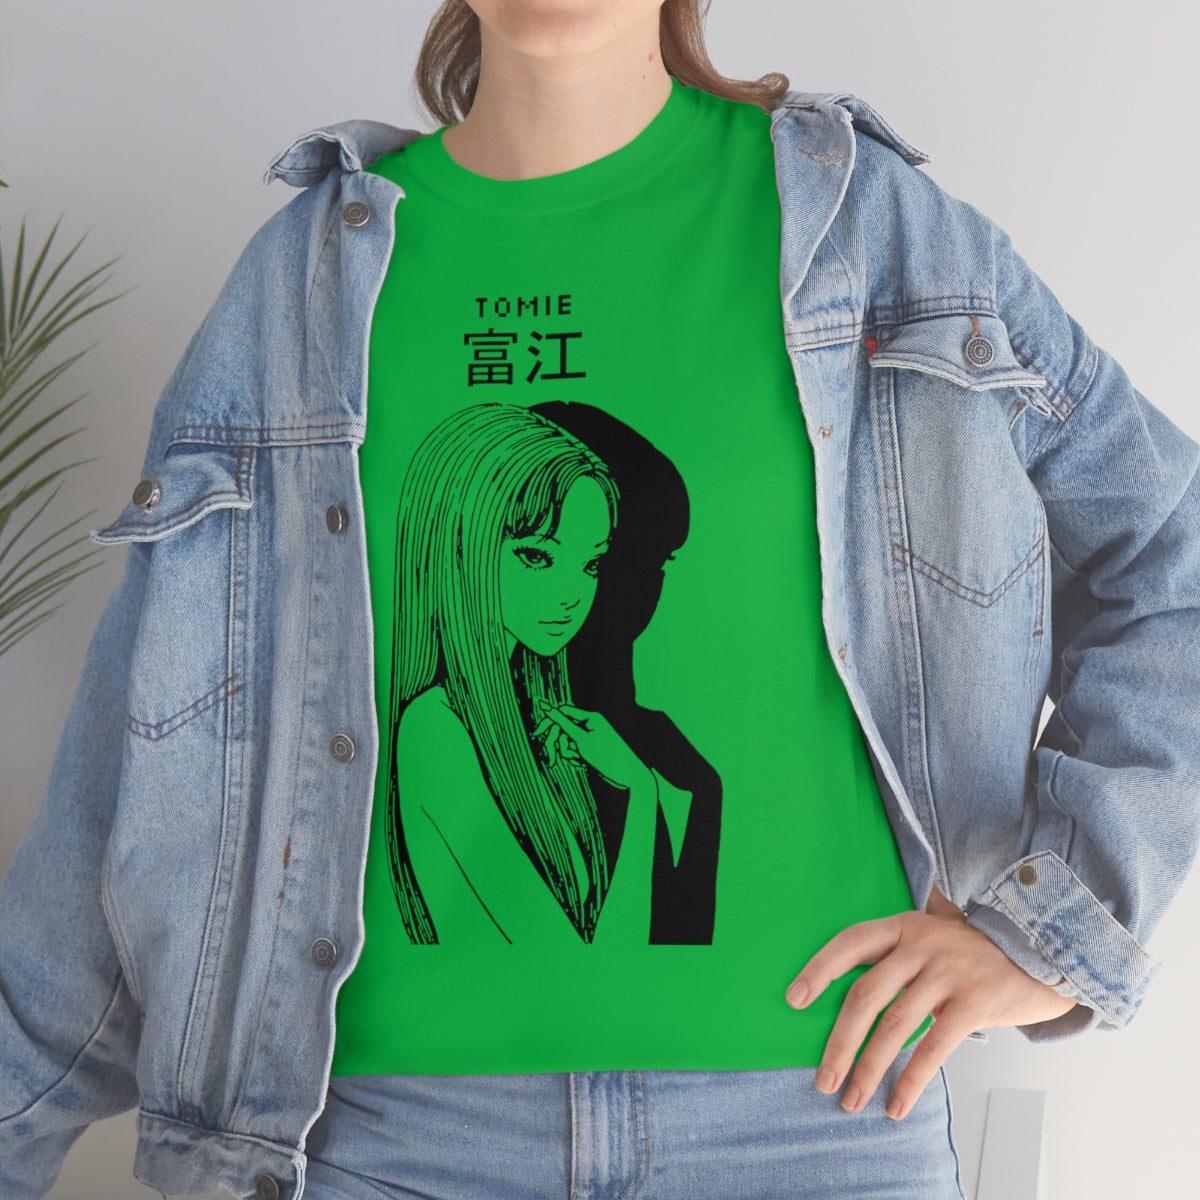 Tomie T-Shirt